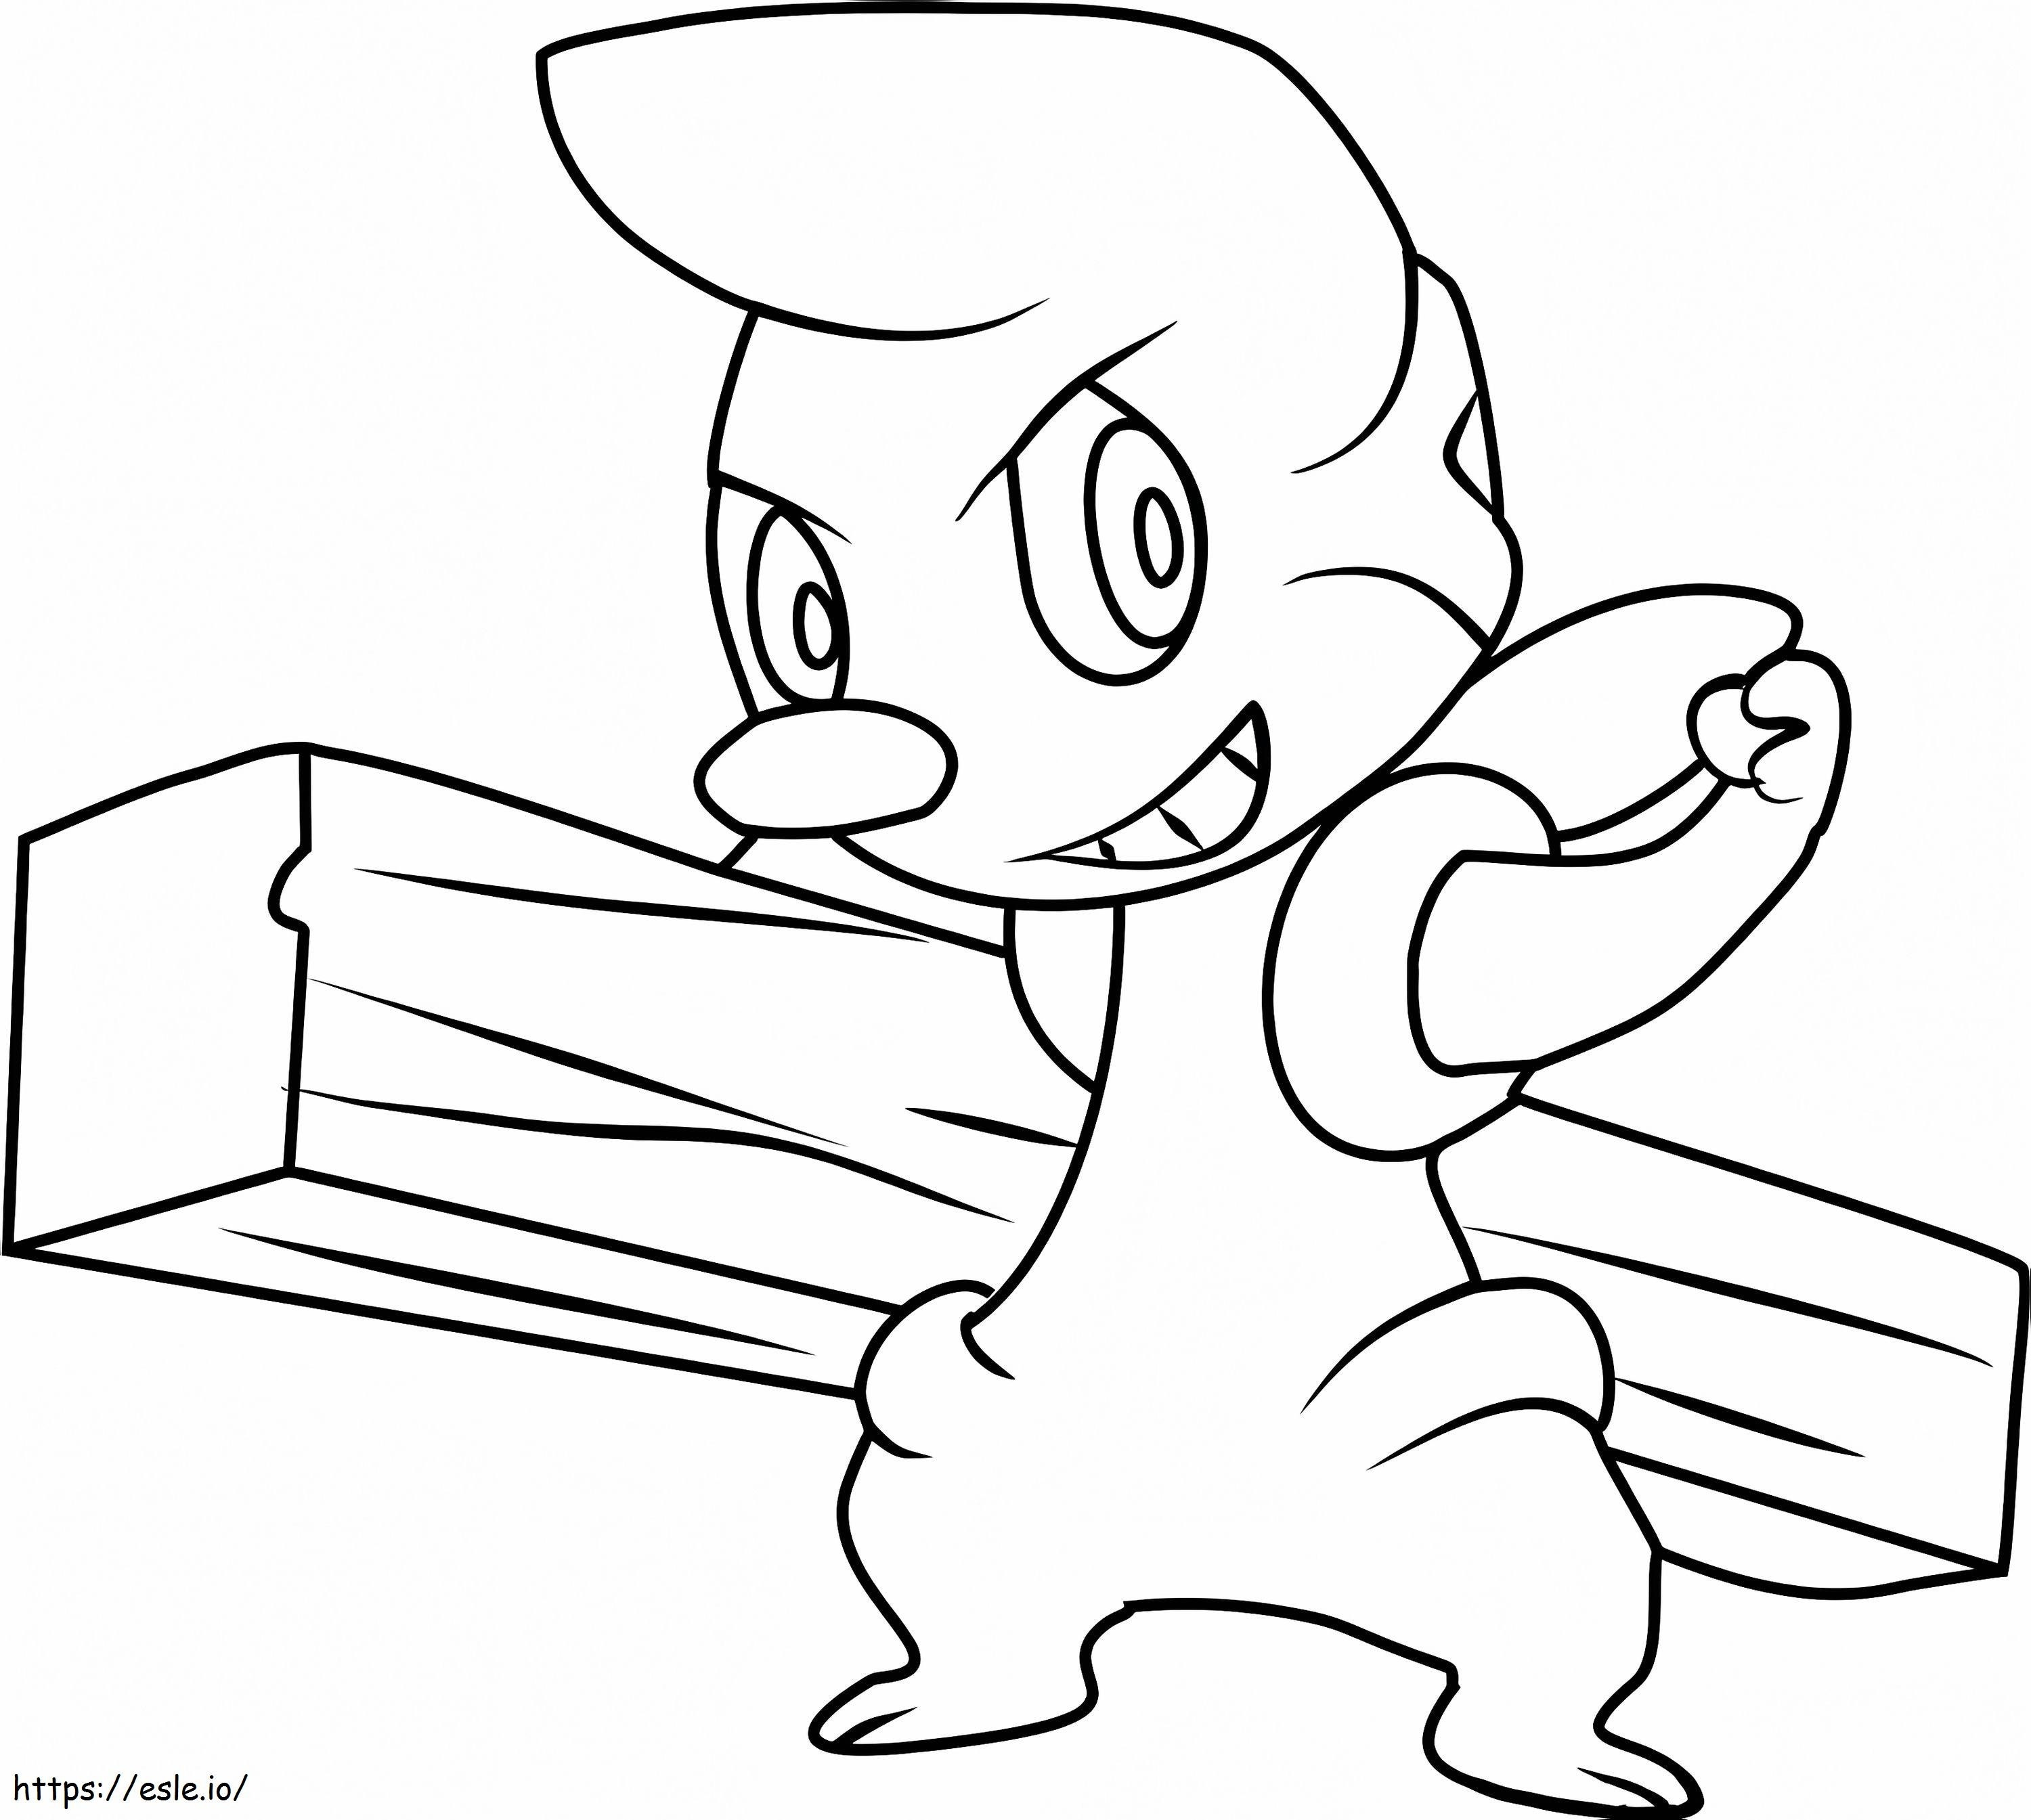 Timber Pokemon coloring page